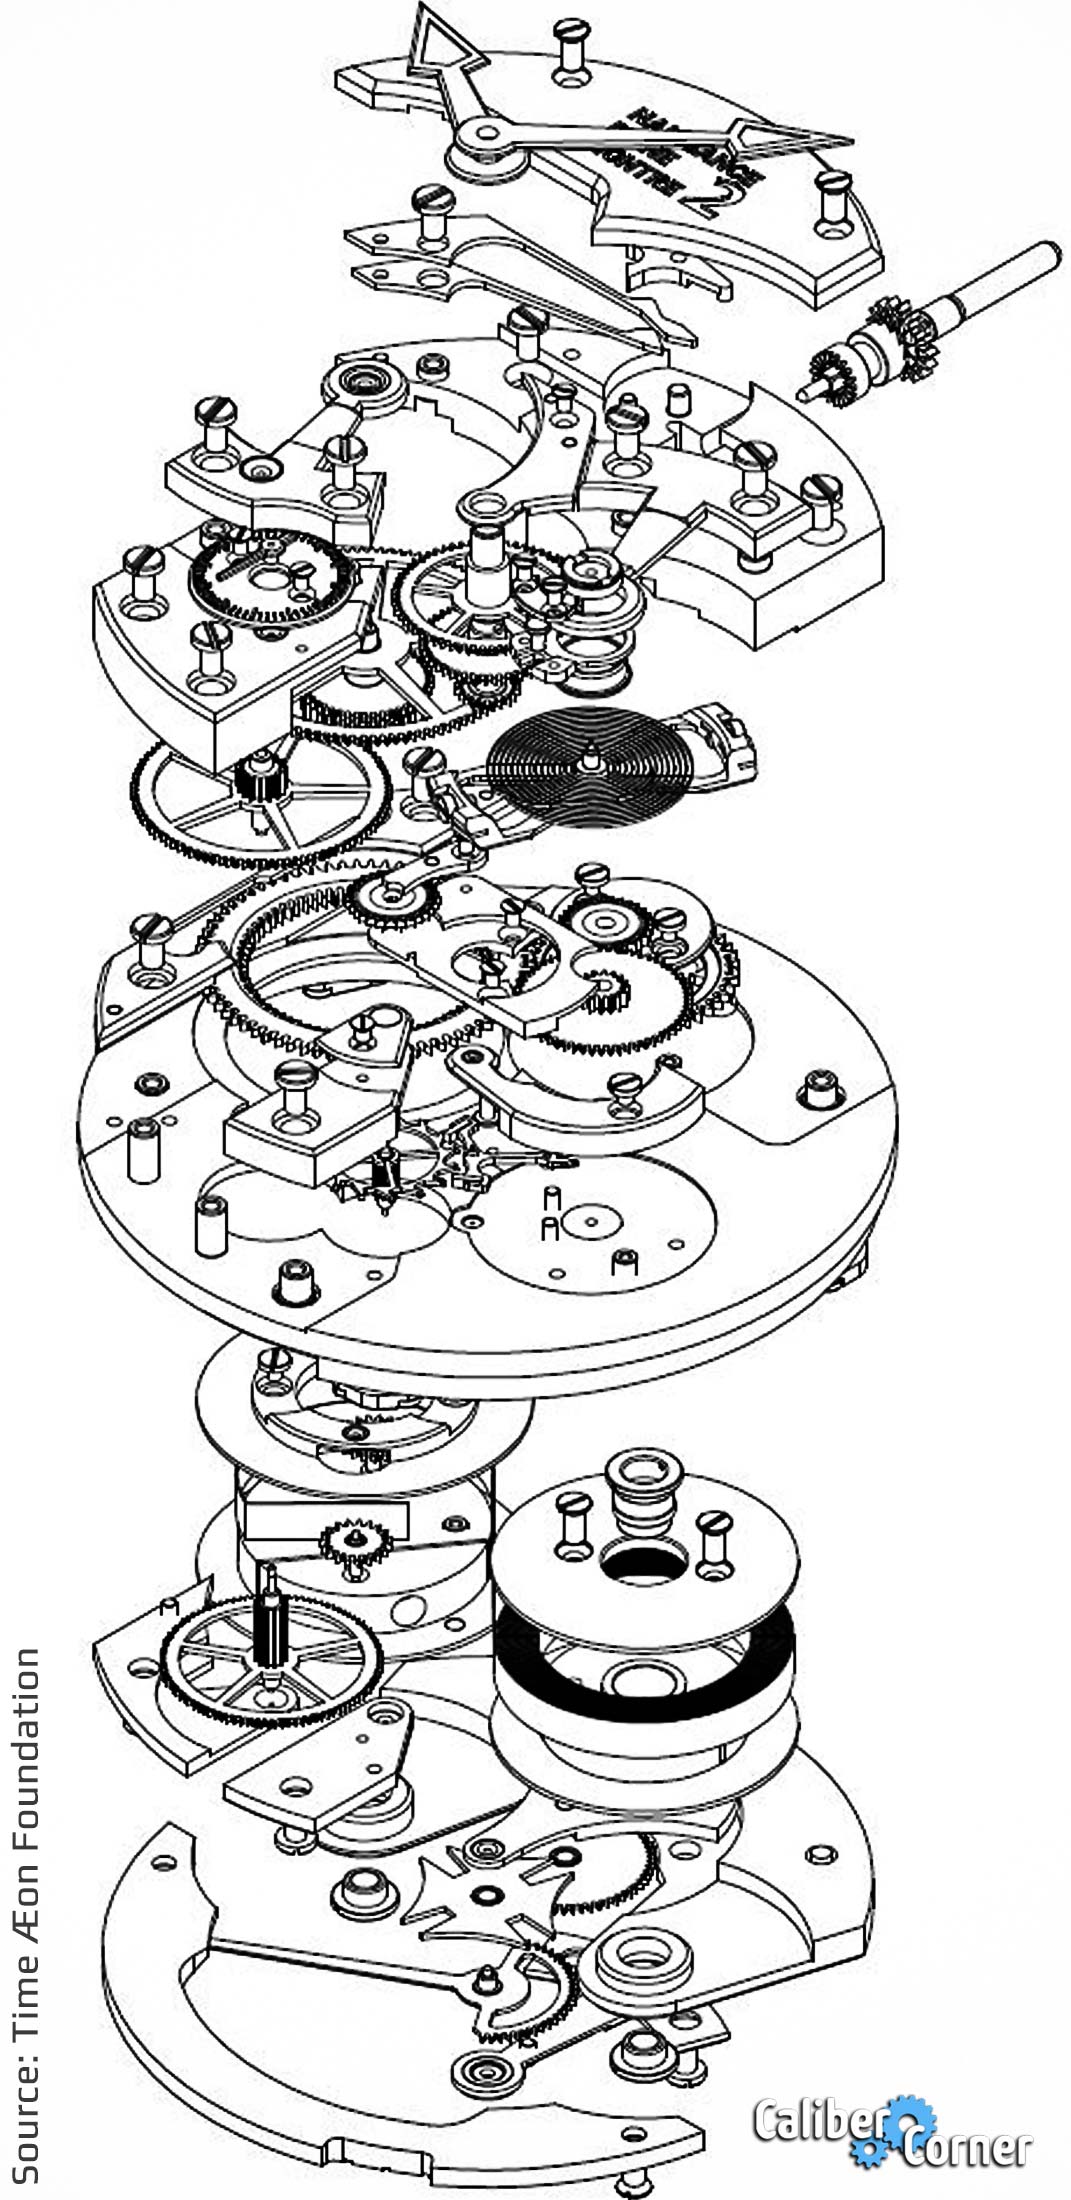 Time Aeon Naissance Dune Montre 2 Exploded View